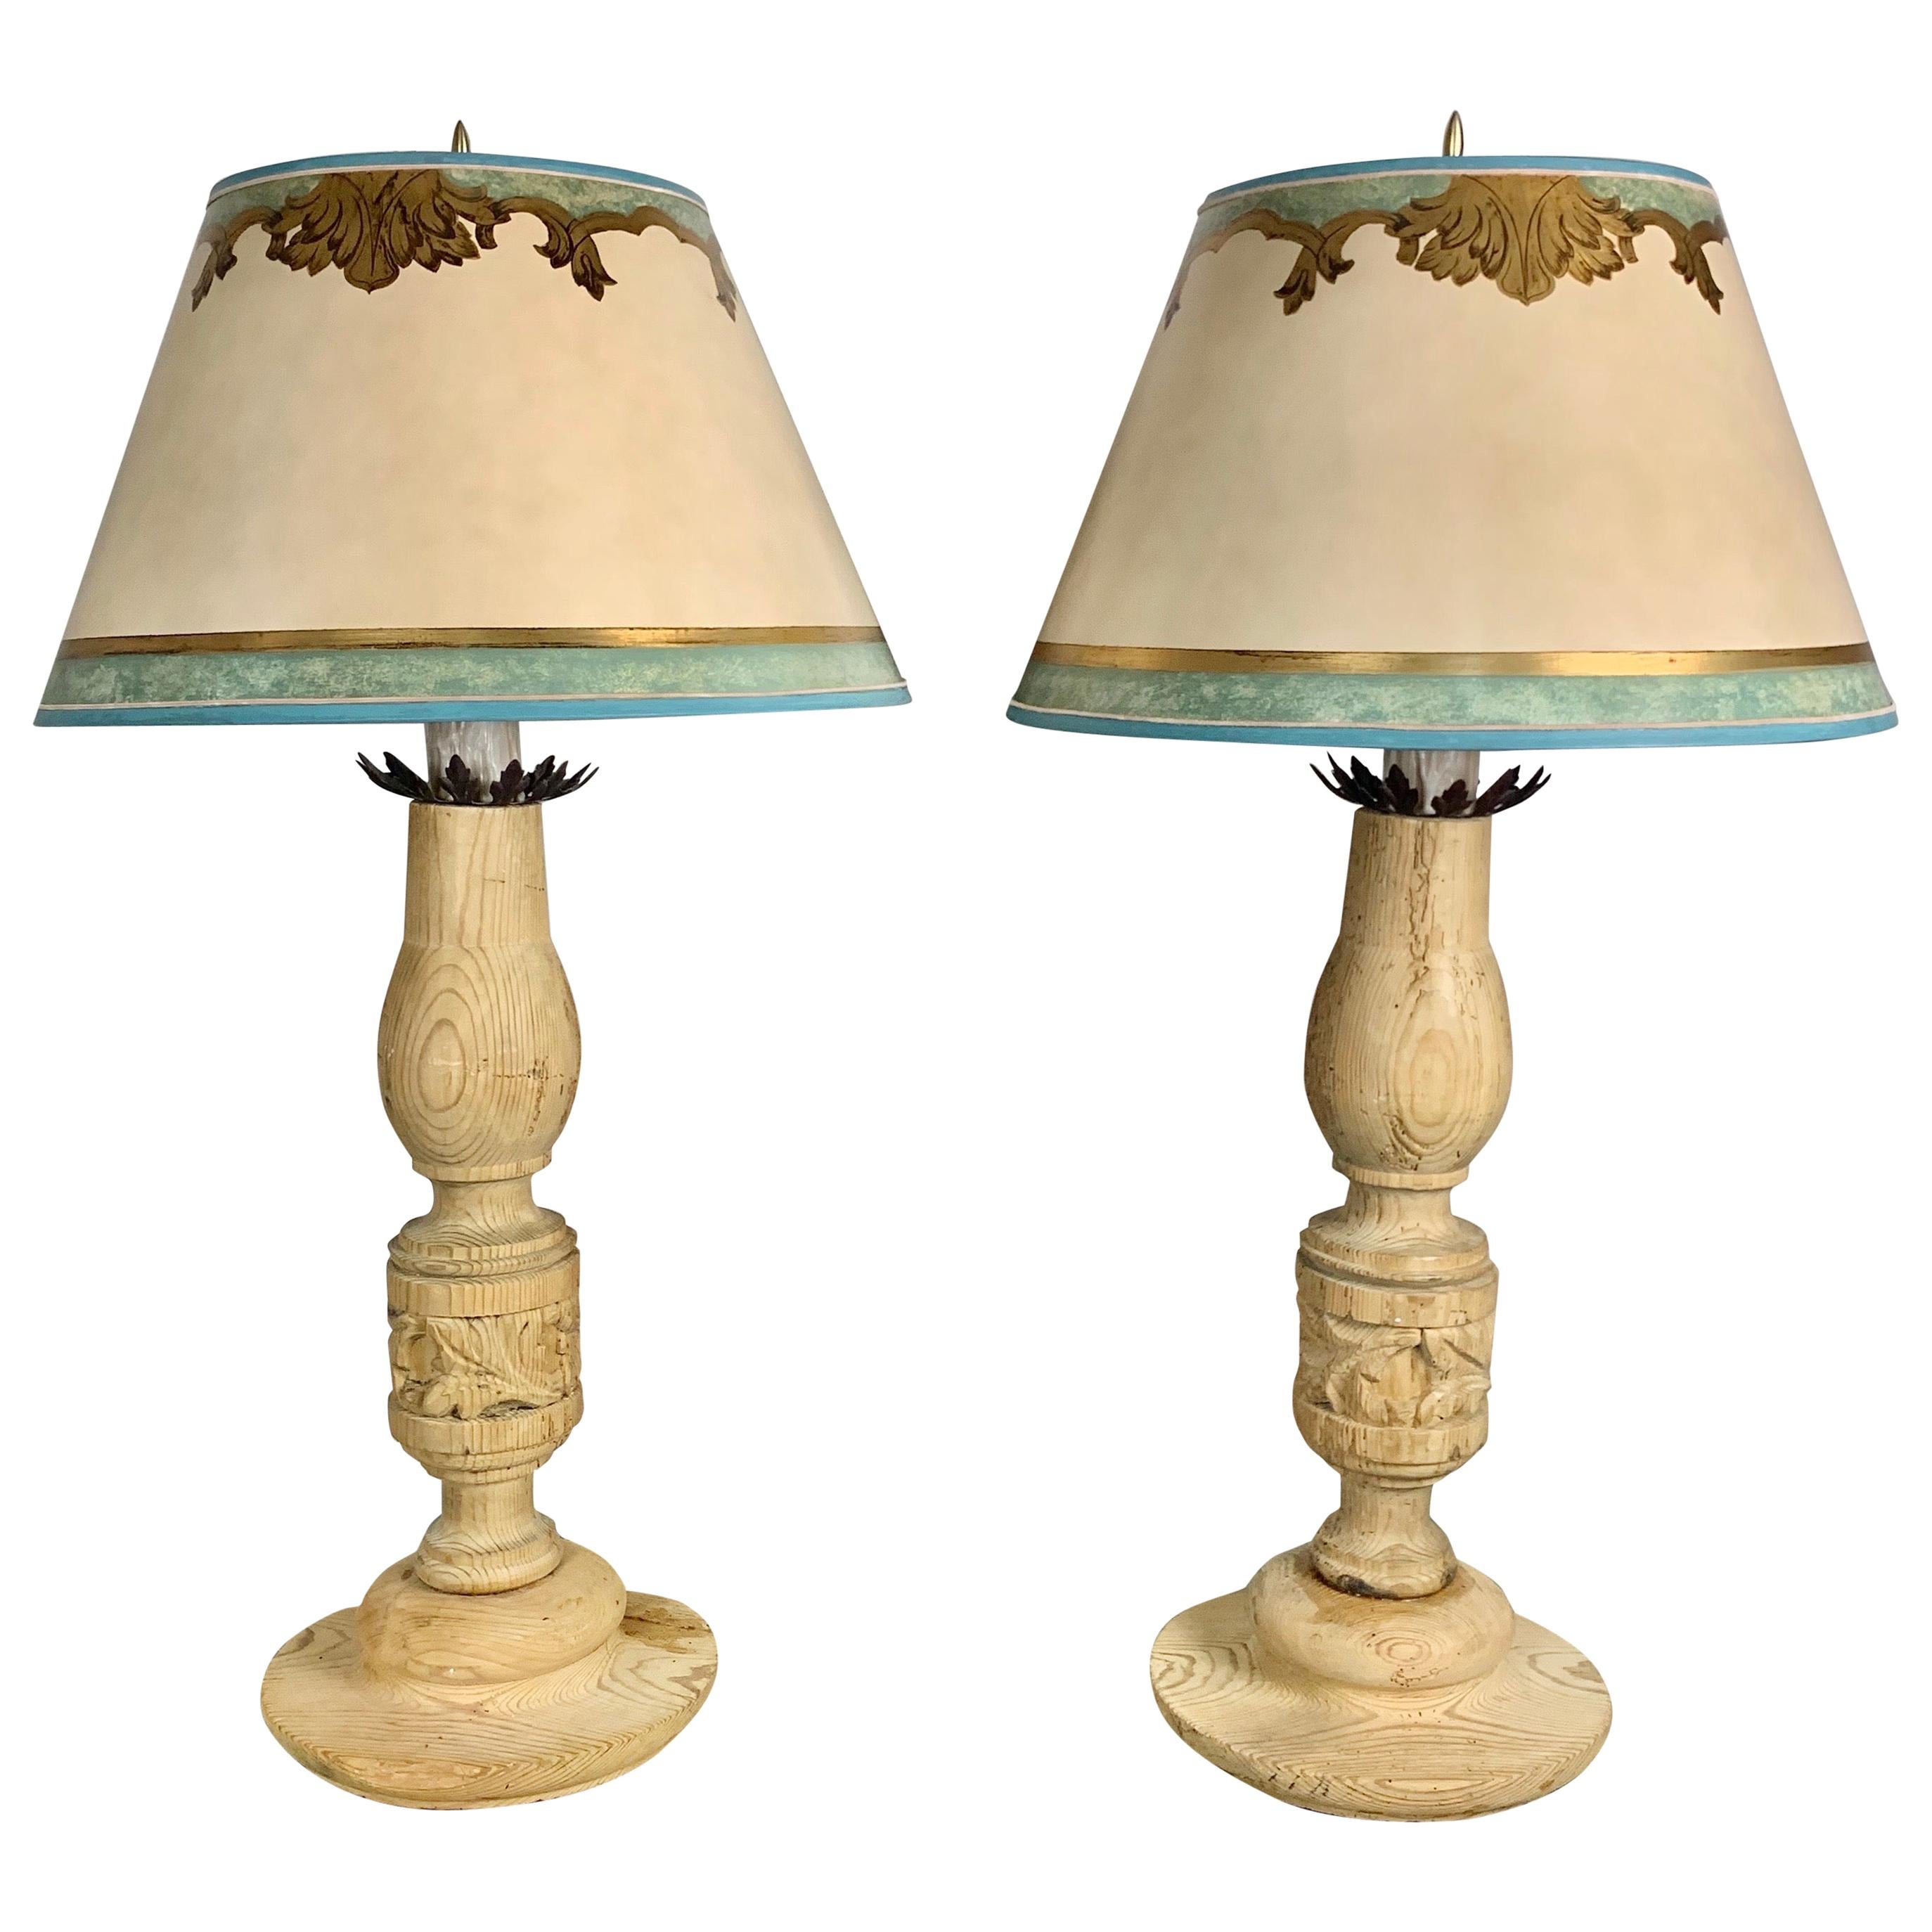 Pair of 19th Century Italian Candlestick Lamps with Custom Parchment Shades